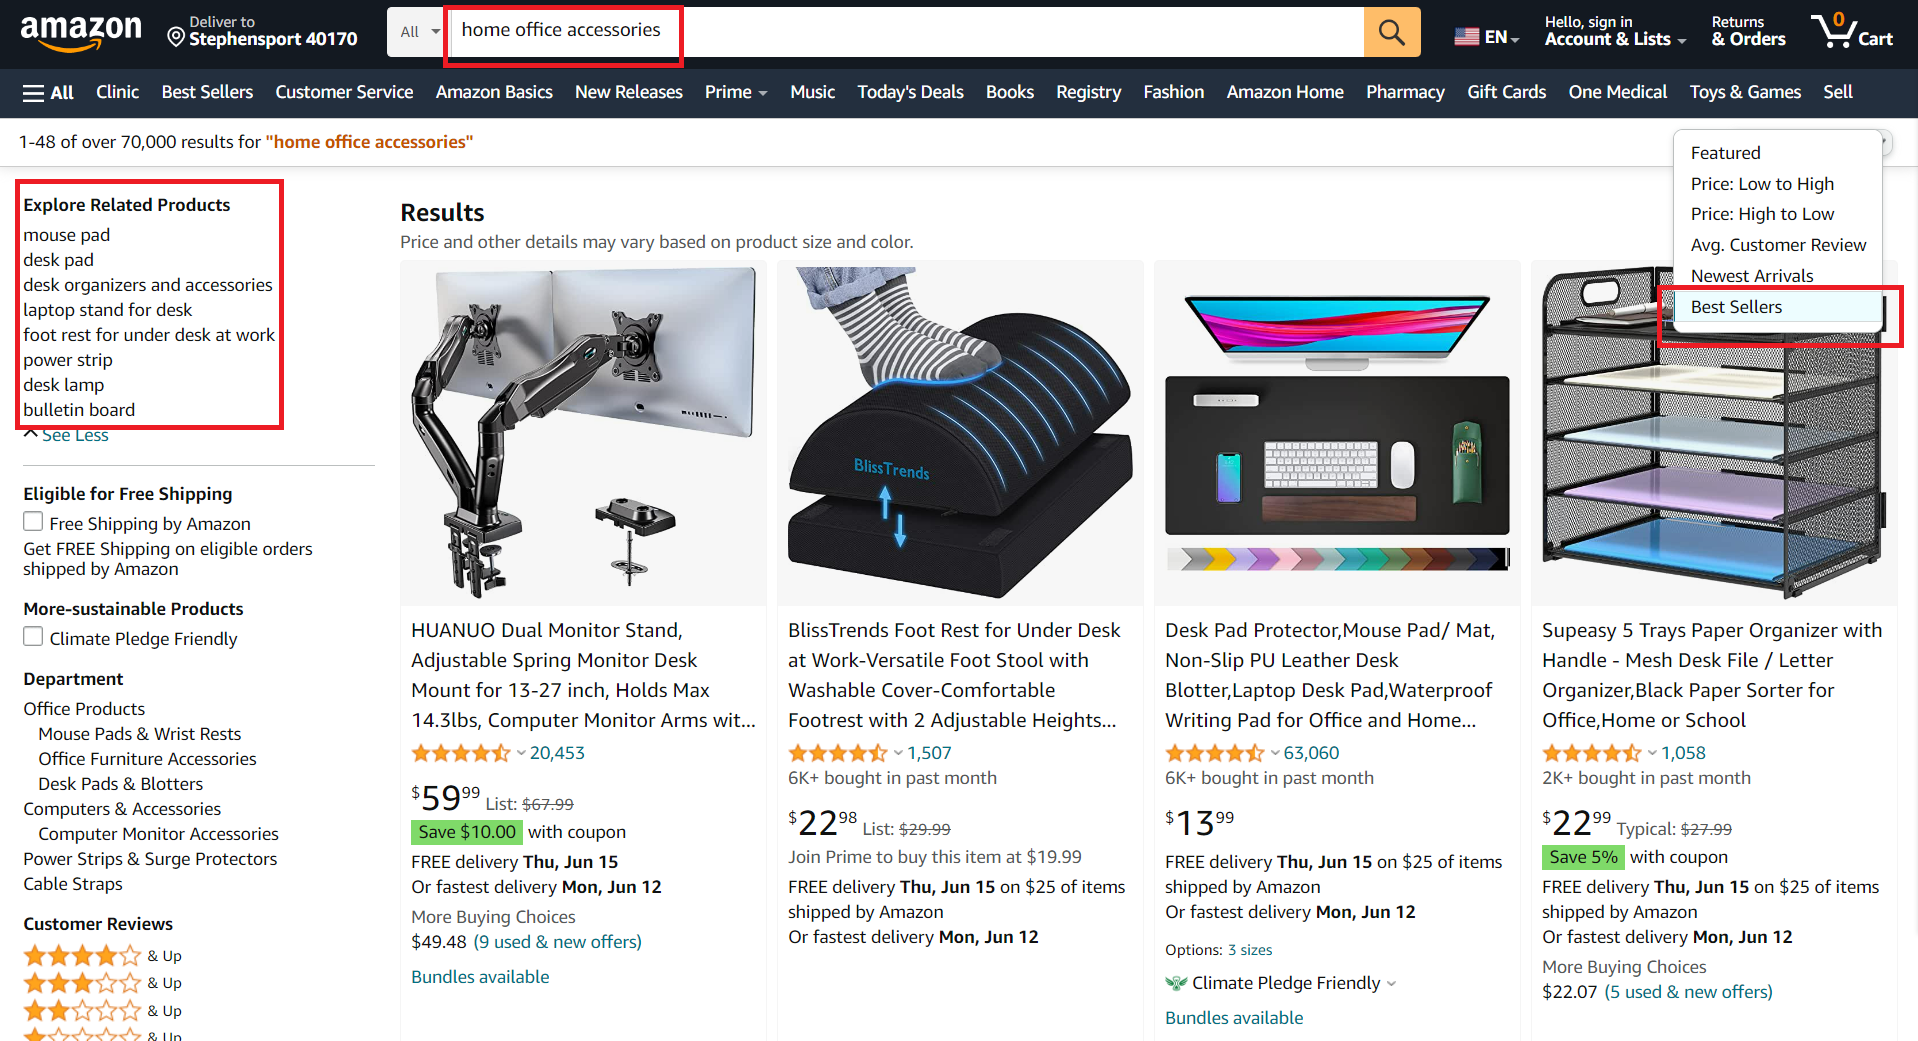 How to Choose the Best Product to Sell Online - First level product idea generation on Amazon